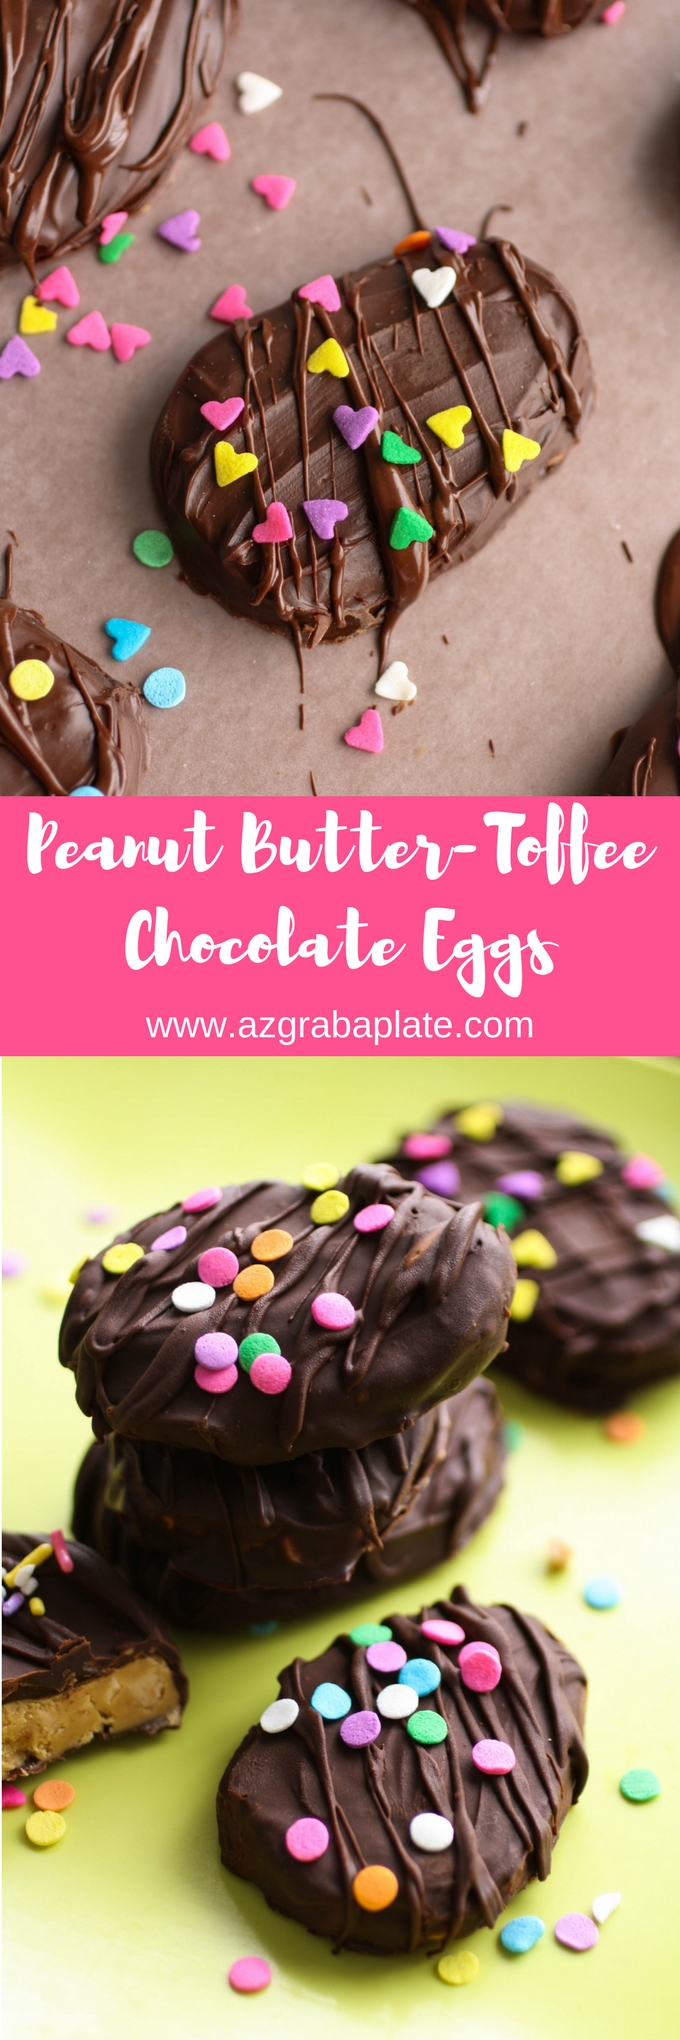 Peanut Butter-Toffee Chocolate Eggs are fun to share! You might also want to keep a few tucked in your freezer to enjoy yourself!